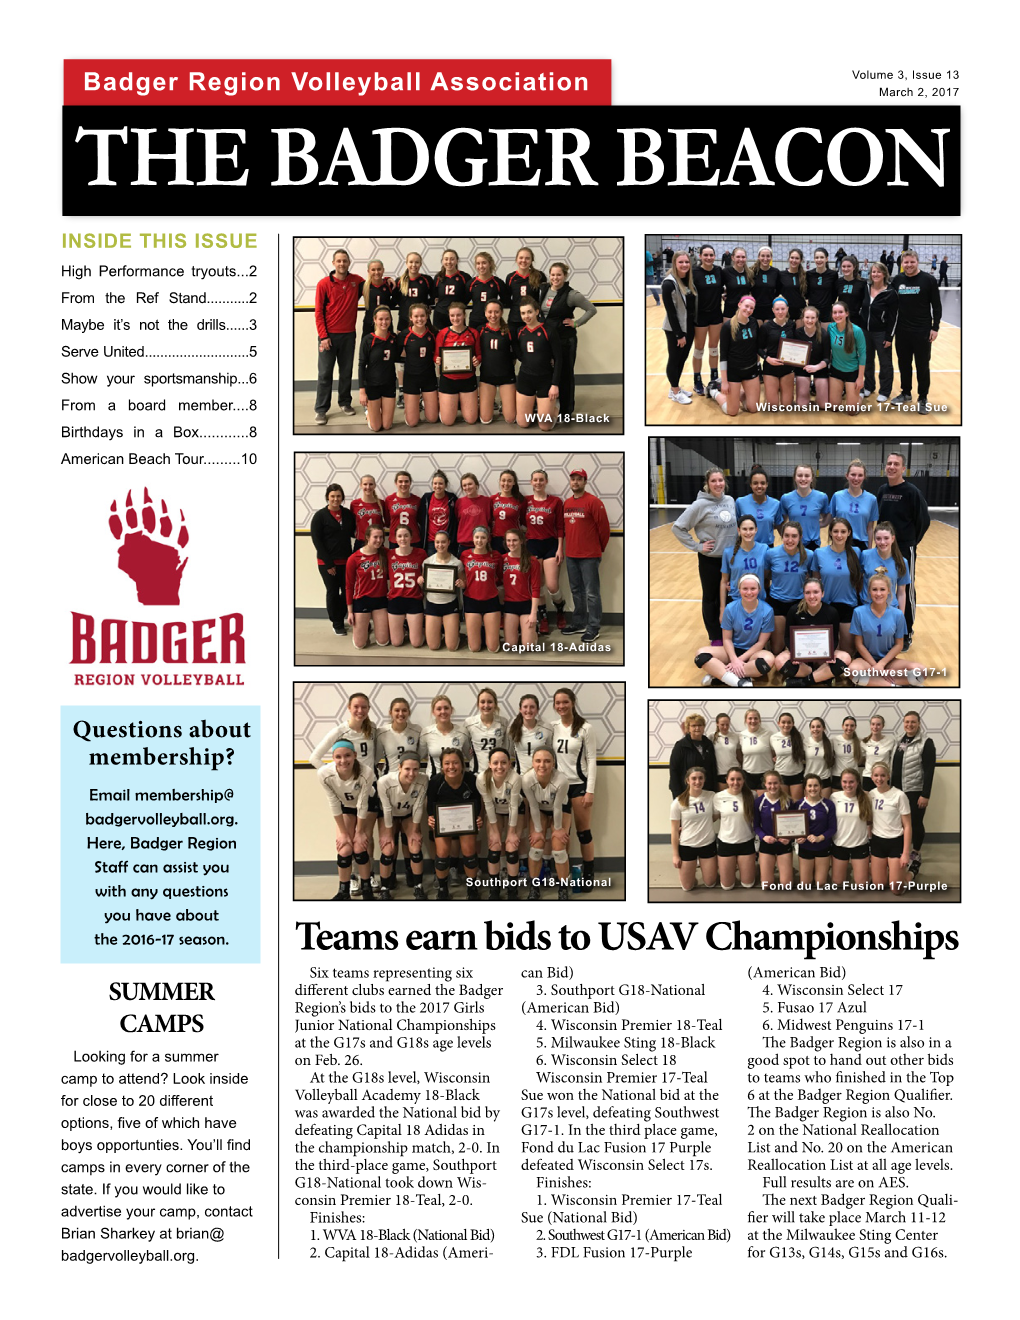 THE BADGER BEACON INSIDE THIS ISSUE High Performance Tryouts...2 from the Ref Stand